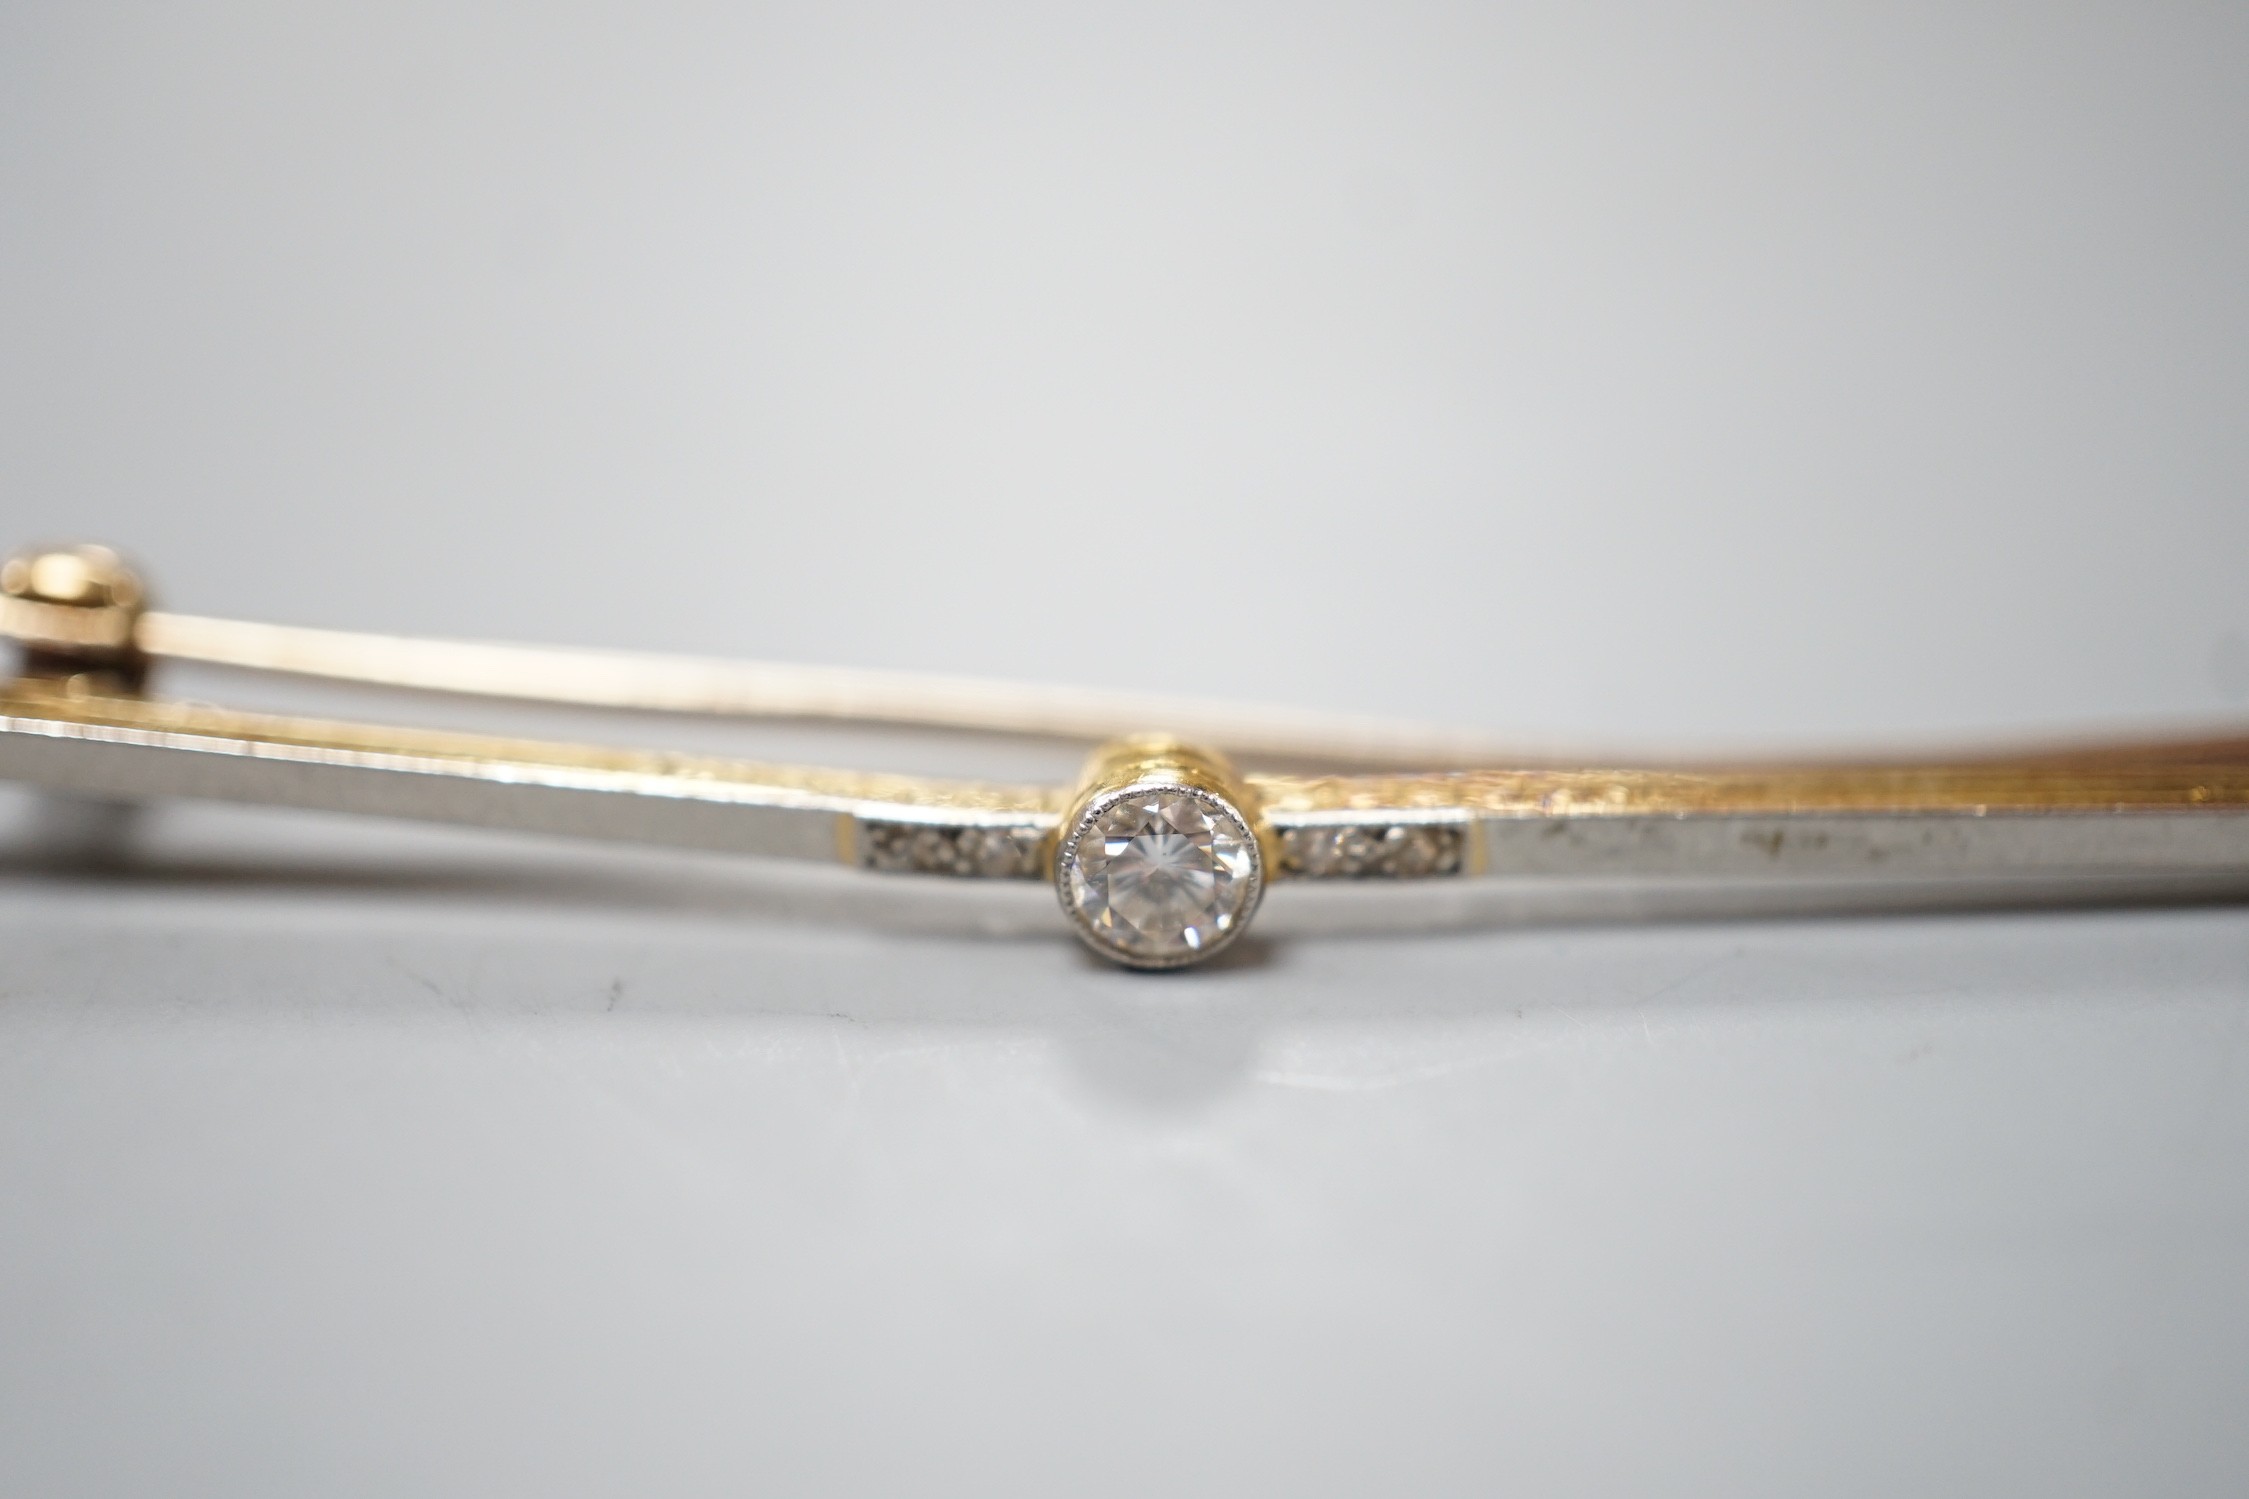 An Edwardian 15ct and single stone diamond set bar brooch, with diamond chip setting, 57mm, gross weight 3.1 grams.